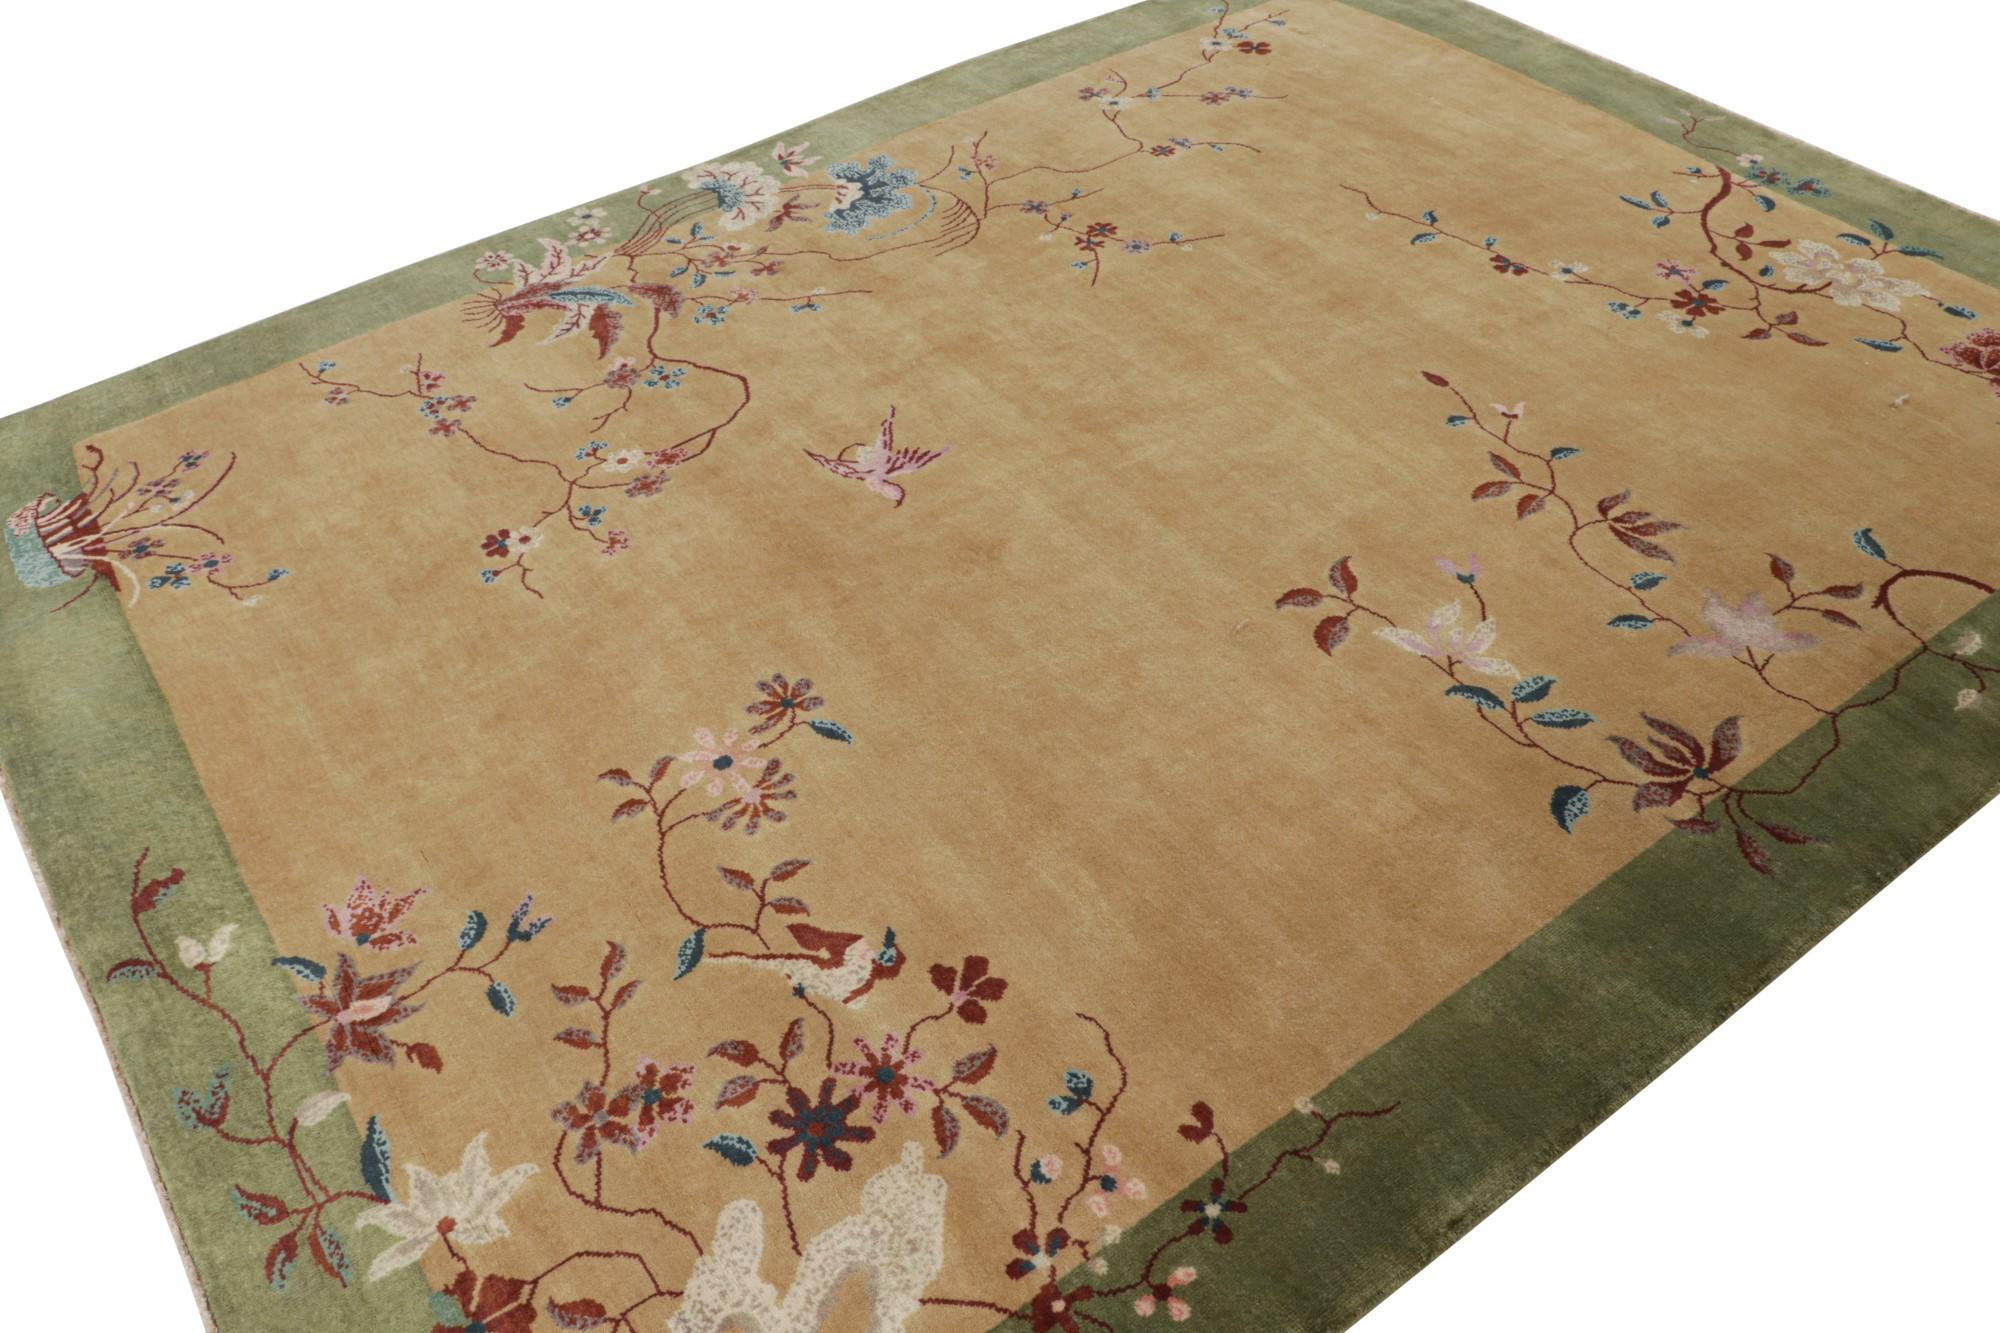 Hand-knotted with wool, this 8x10 Chinese Art Deco rug features vibrant pictorials and floral patterns on a beige/brown field and the green border alike. 

On the Design: 

Hand-knotted in wool, this contemporary piece recaptures the Chinese Art